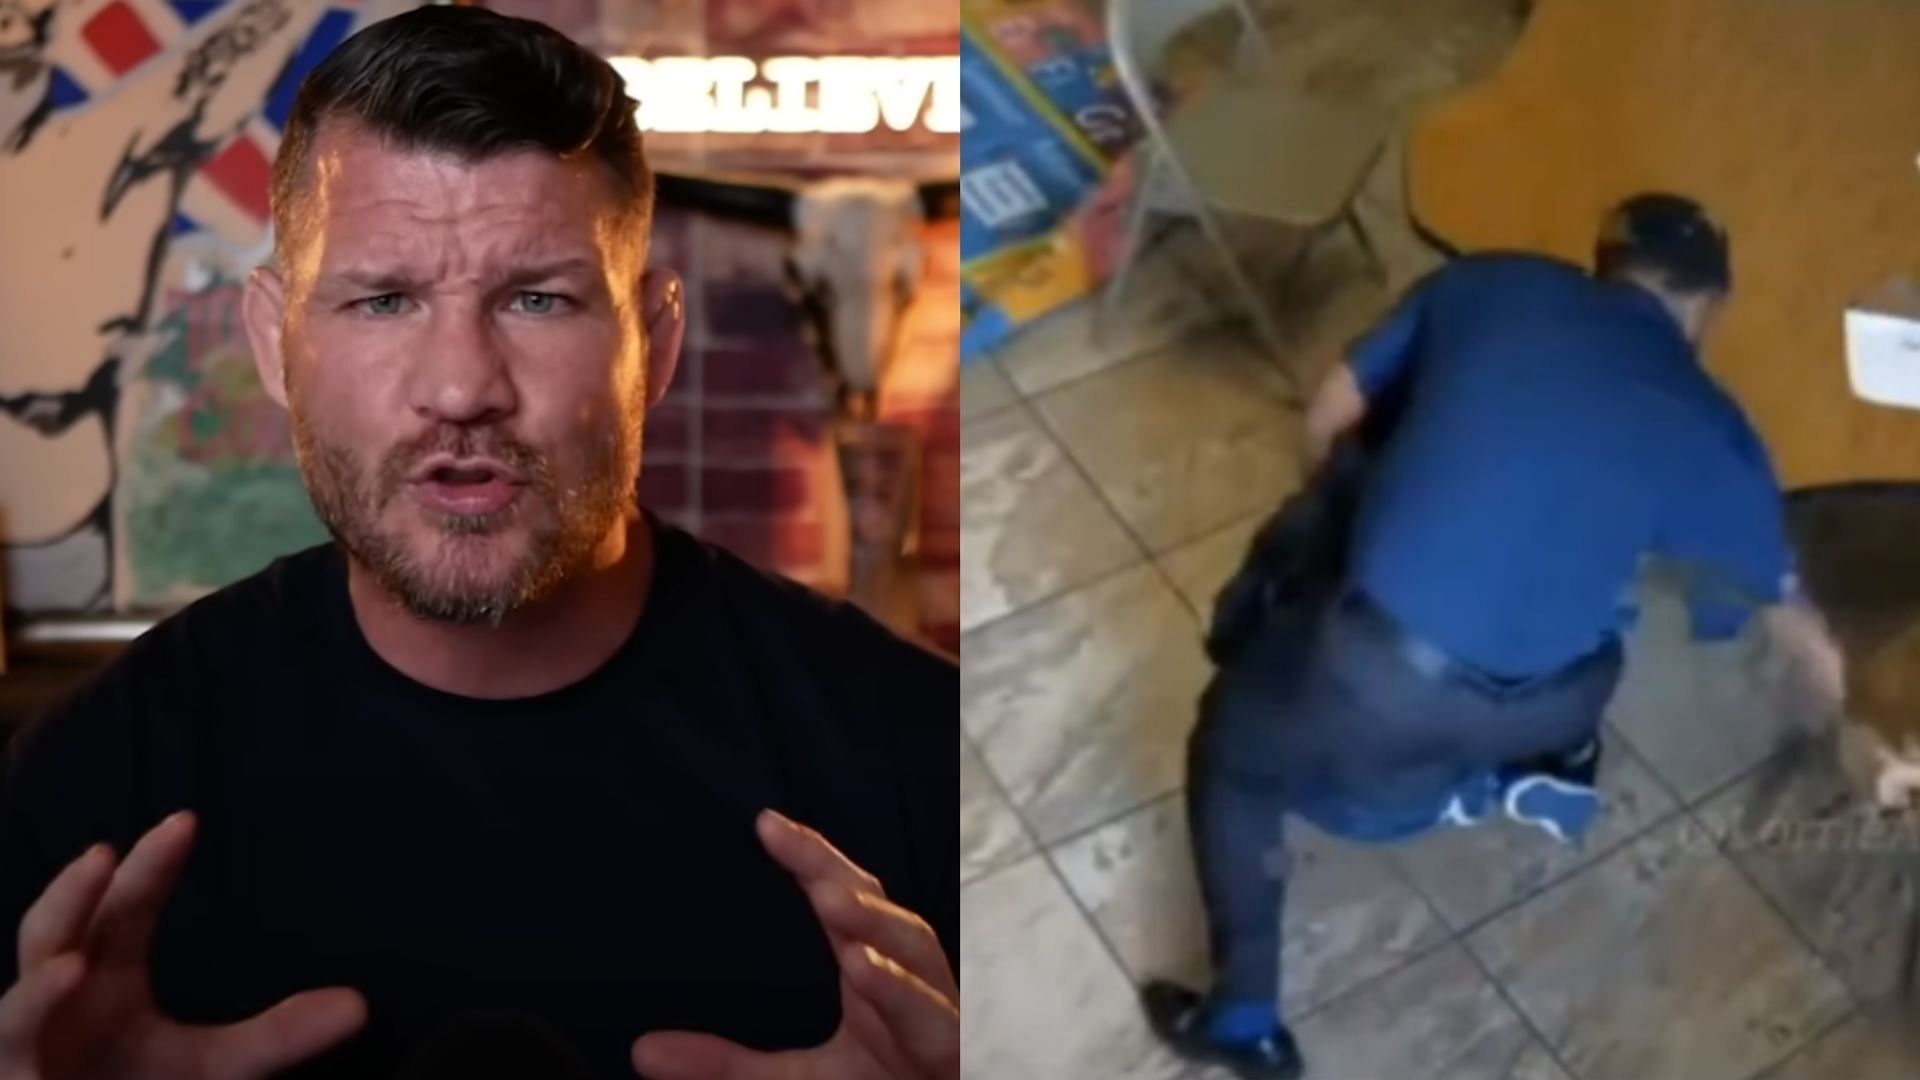 Michael Bisping (left) reacts to Florida School Principal allegedly attacking student [Images courtesy of Michael Bisping on YouTube]